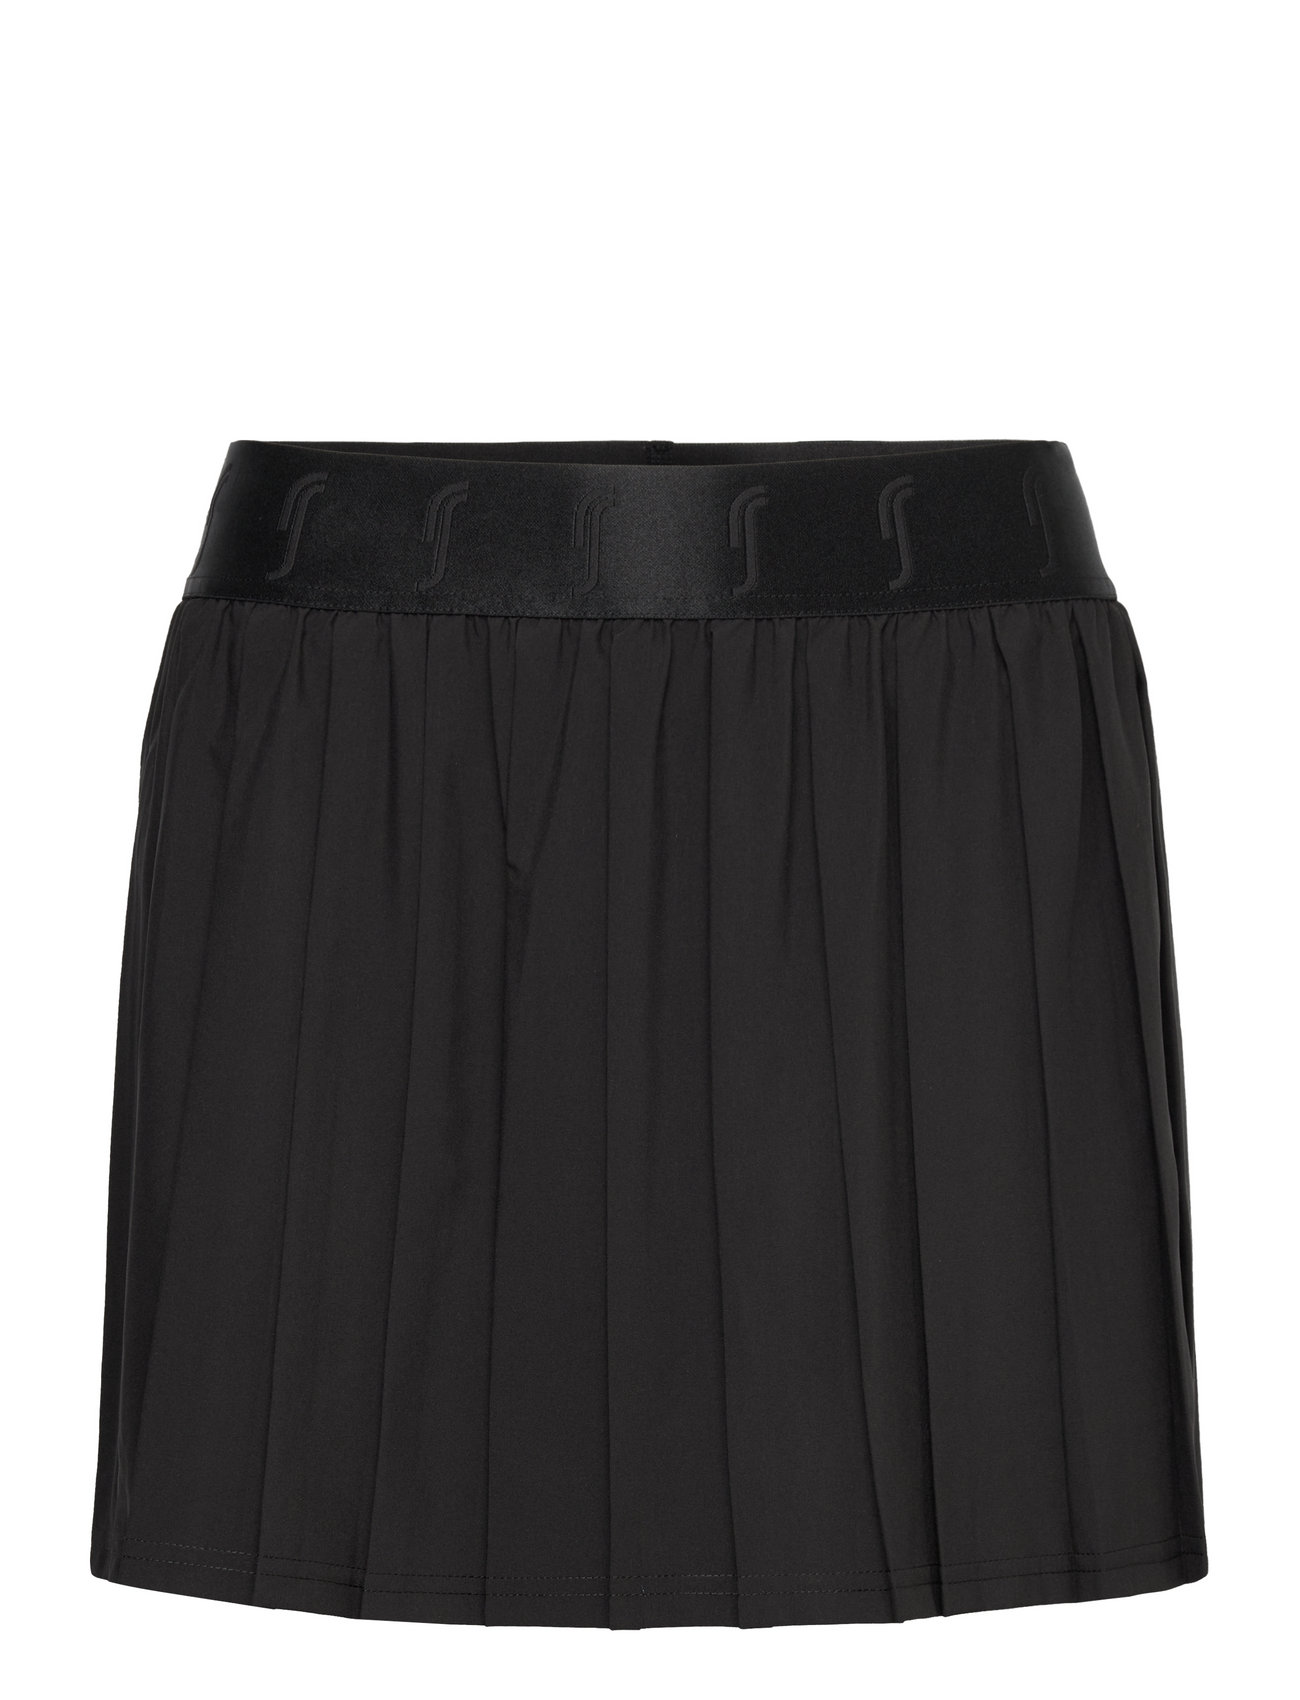 Women’s Pleated Skirt Sport Pleated Skirts Black RS Sports